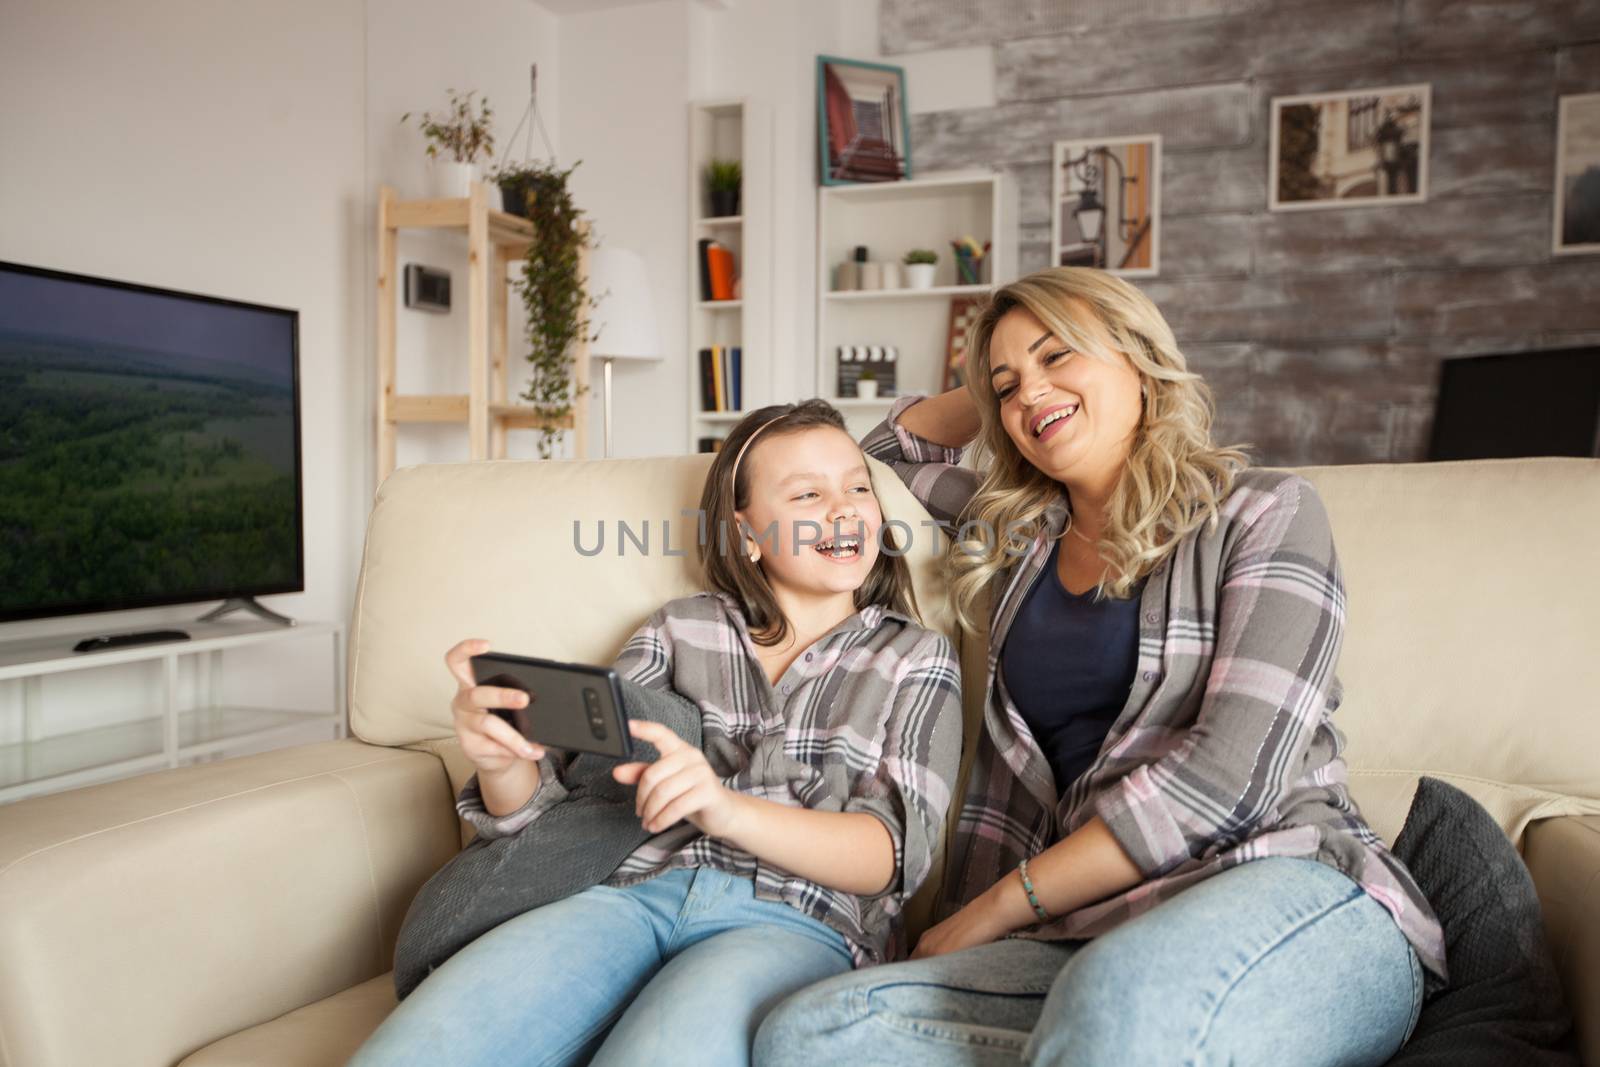 Little girl with braces smiling and pointing at phone screen sitting with her mother on the couch.